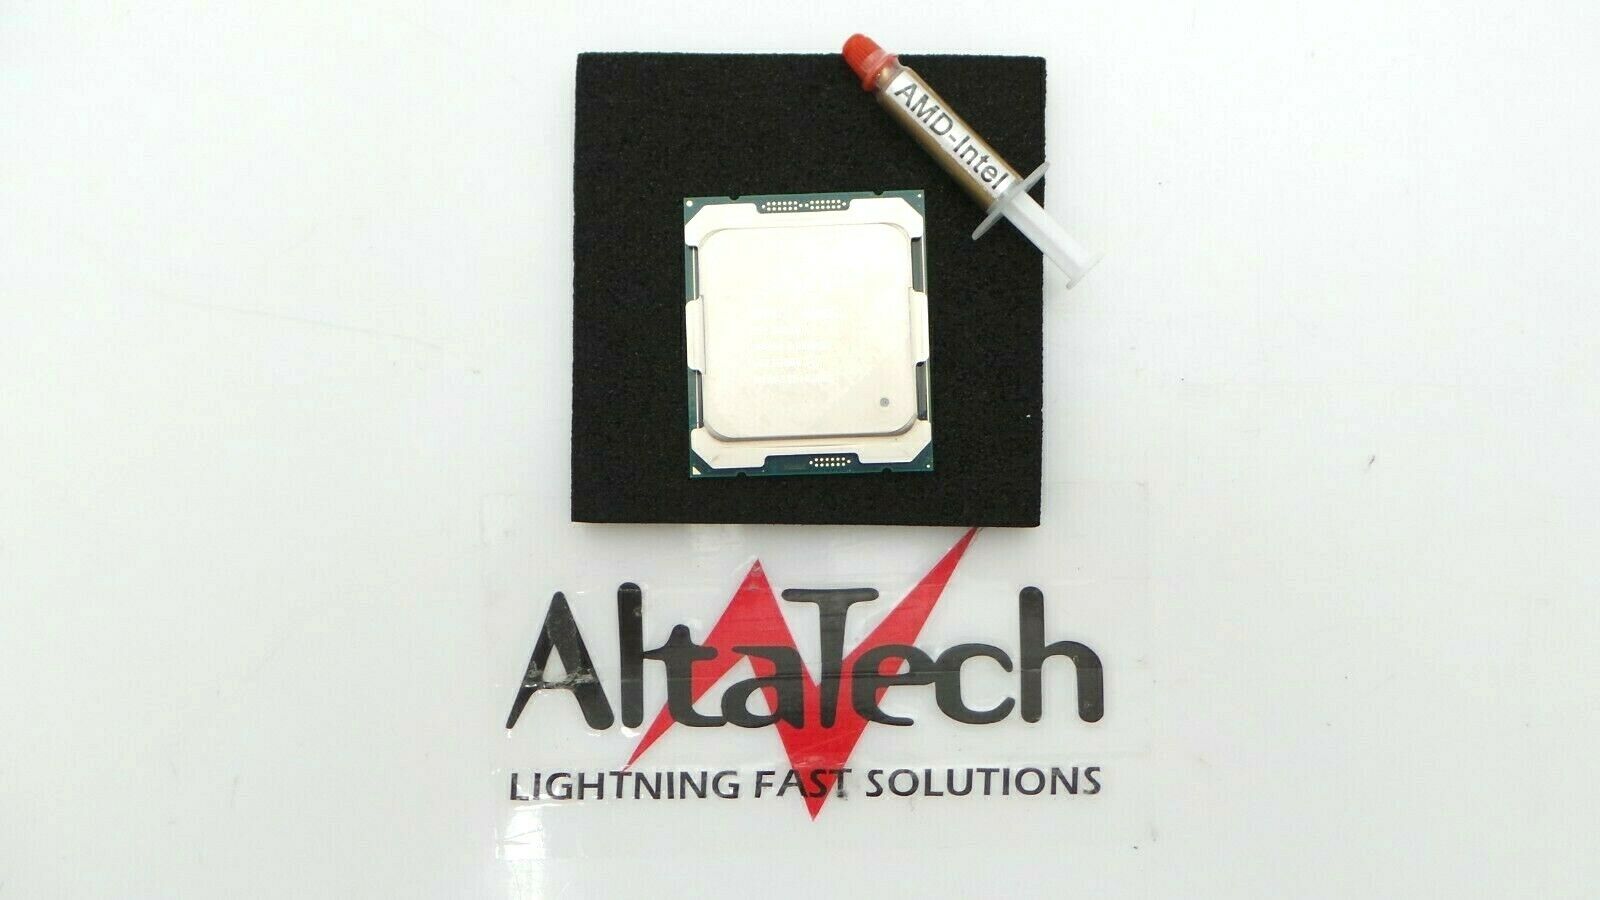 Intel SR2N2 Intel SR2N2 Xeon E5-2690V4 14-Core 2.6GHz 35MB 135W 14C Processor w/ Thermal Grease, Used